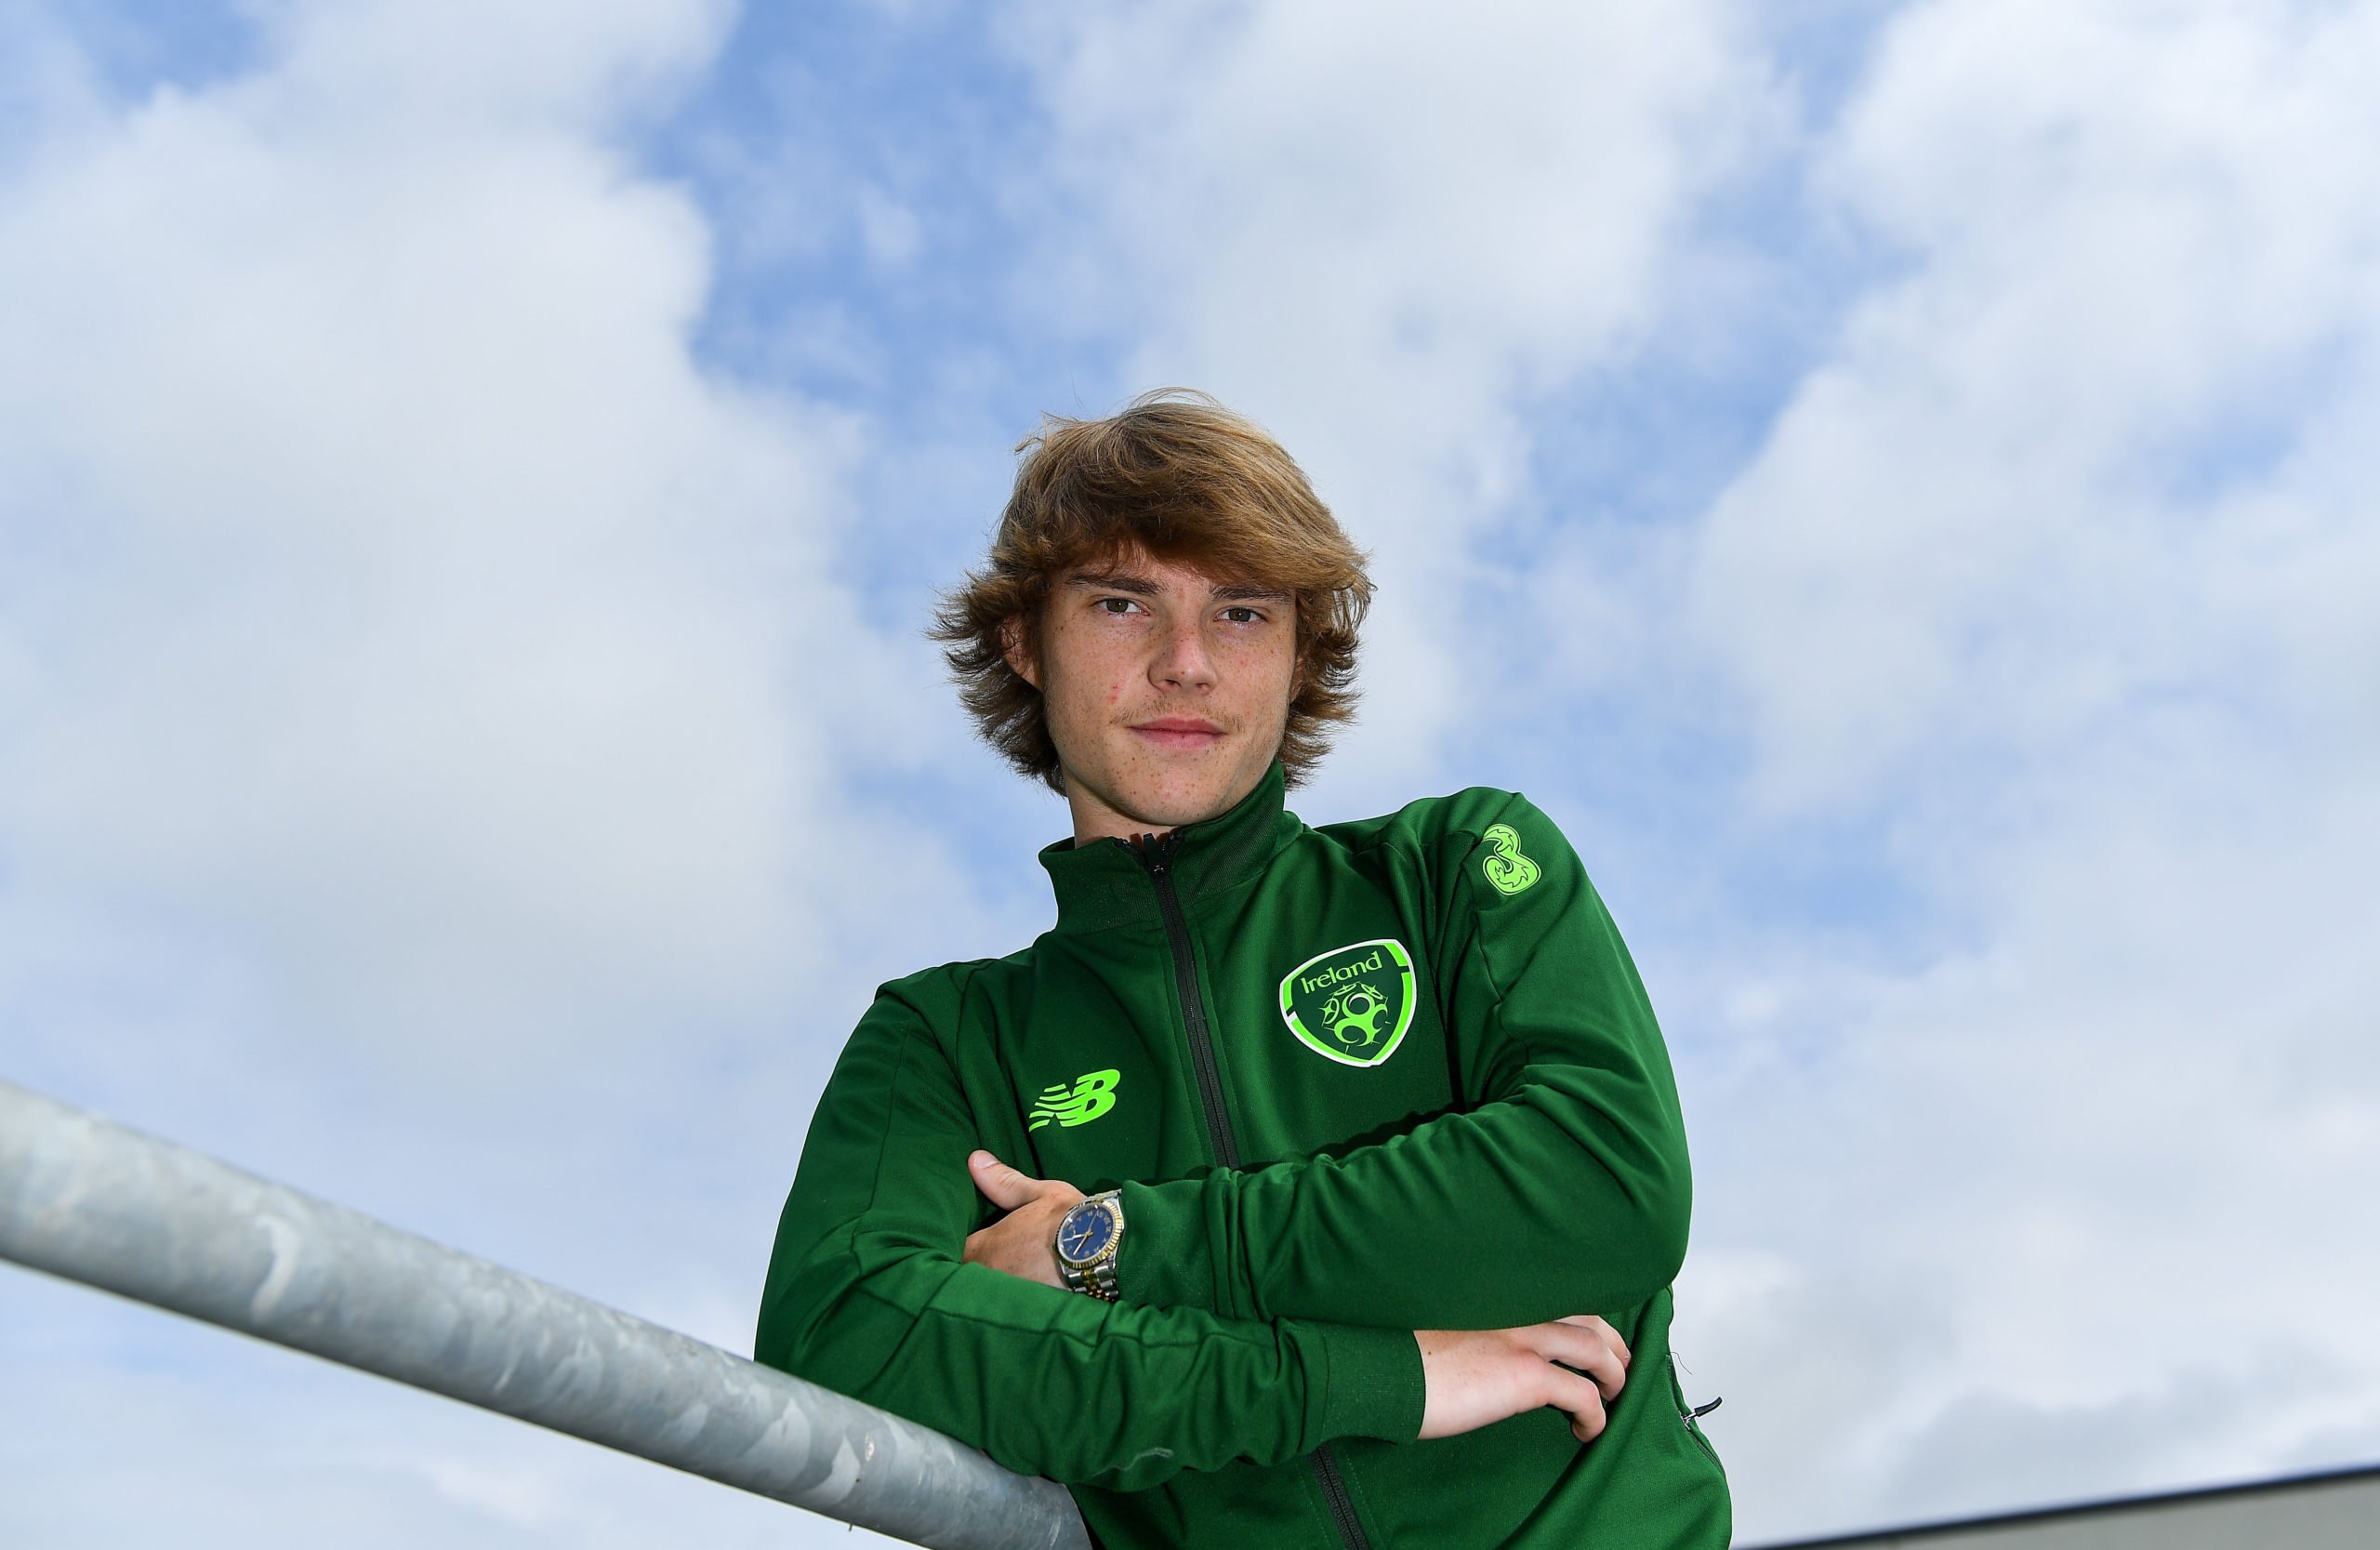 Celtic youngster Luca Connell wins Goal of the Year for loan side